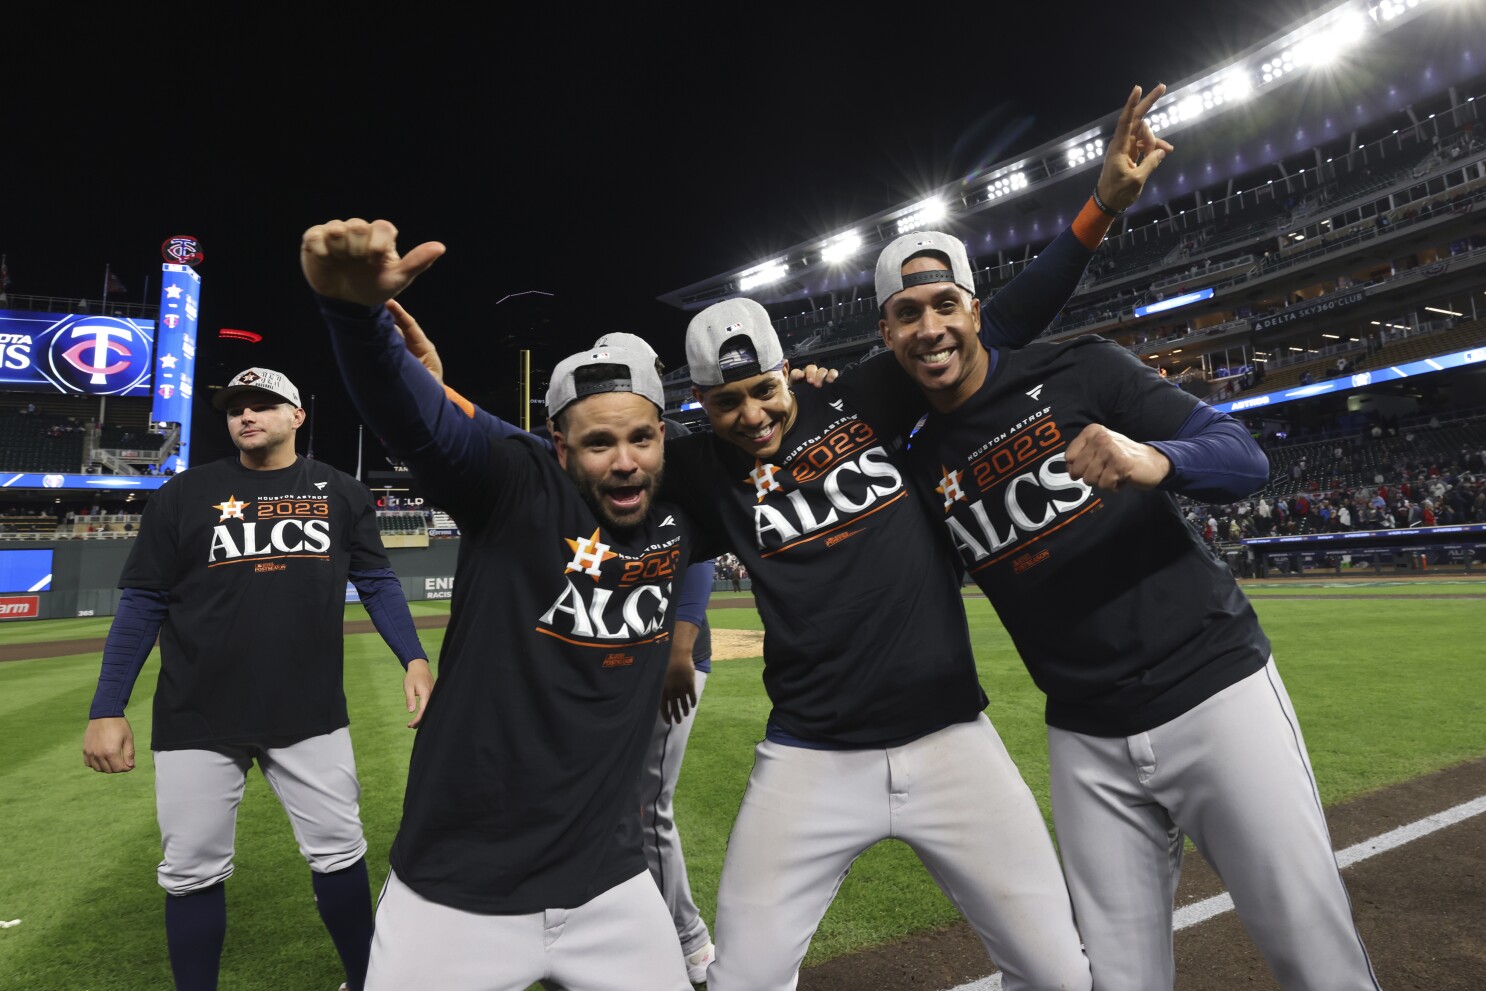 Houston Astros win a BIG Game 3 and are one game away from another